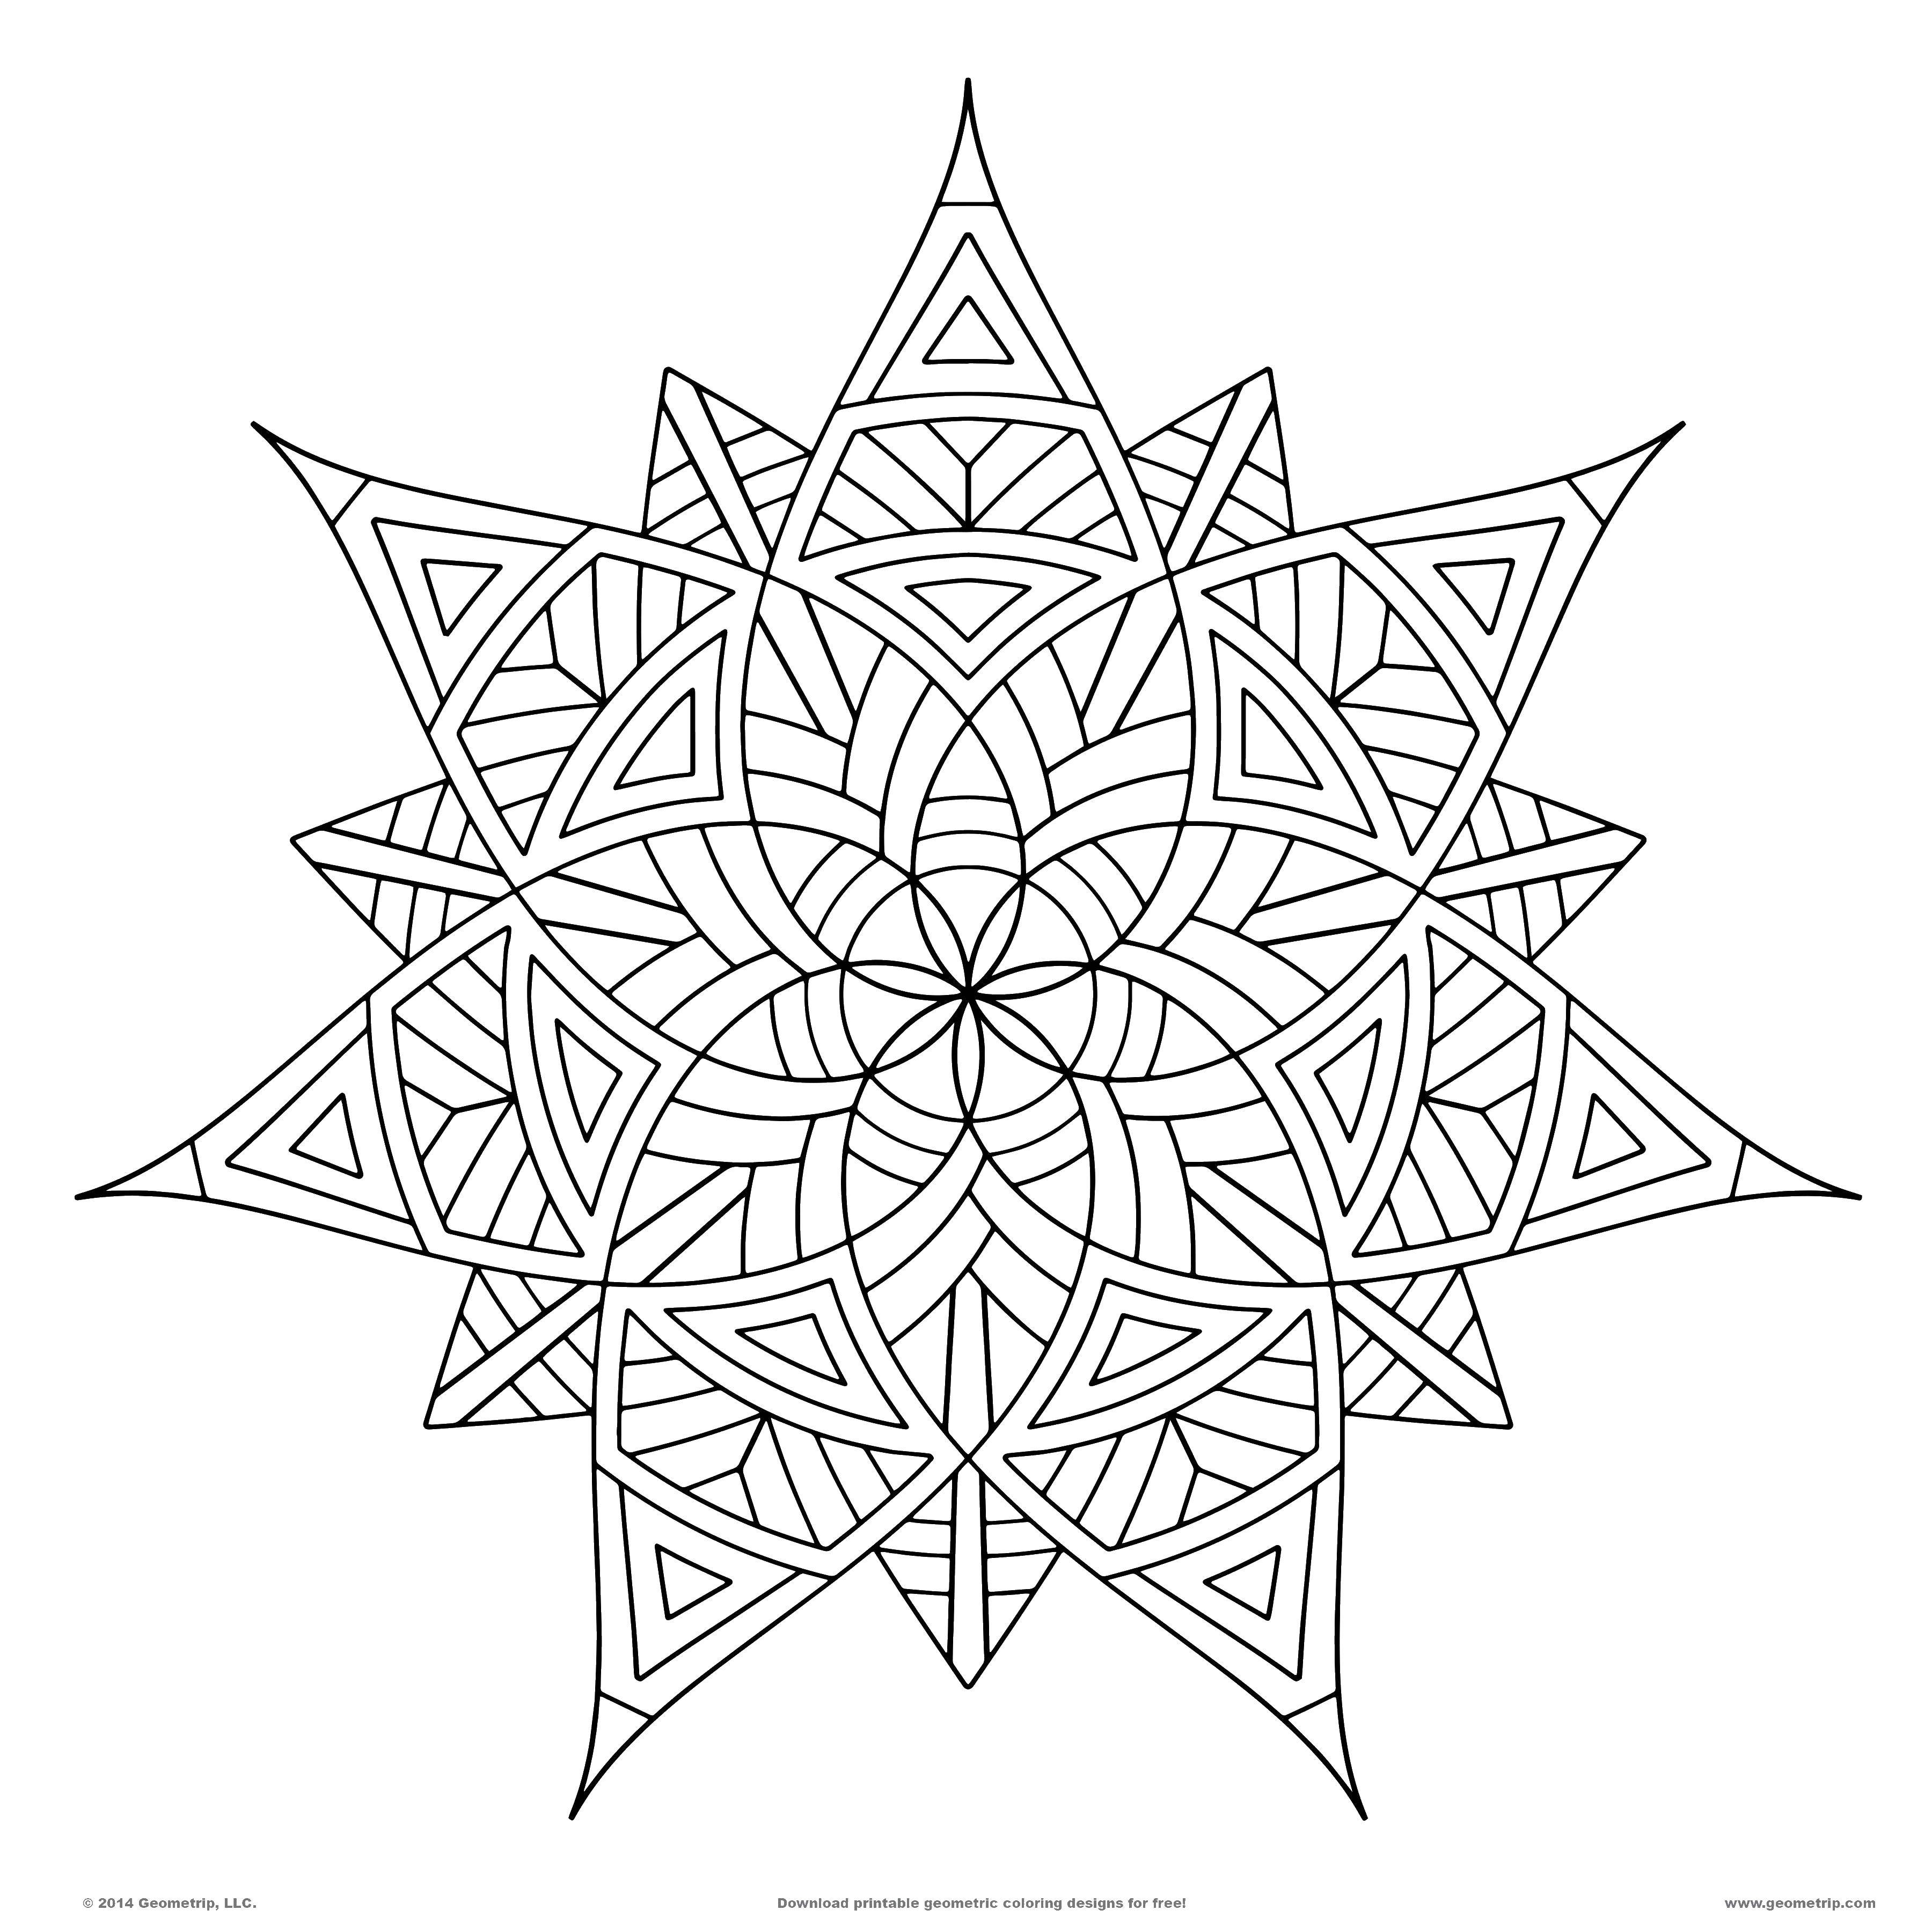 Coloring Ornament pattern patterns medallion. Category Patterns with flowers. Tags:  medallion, badge.